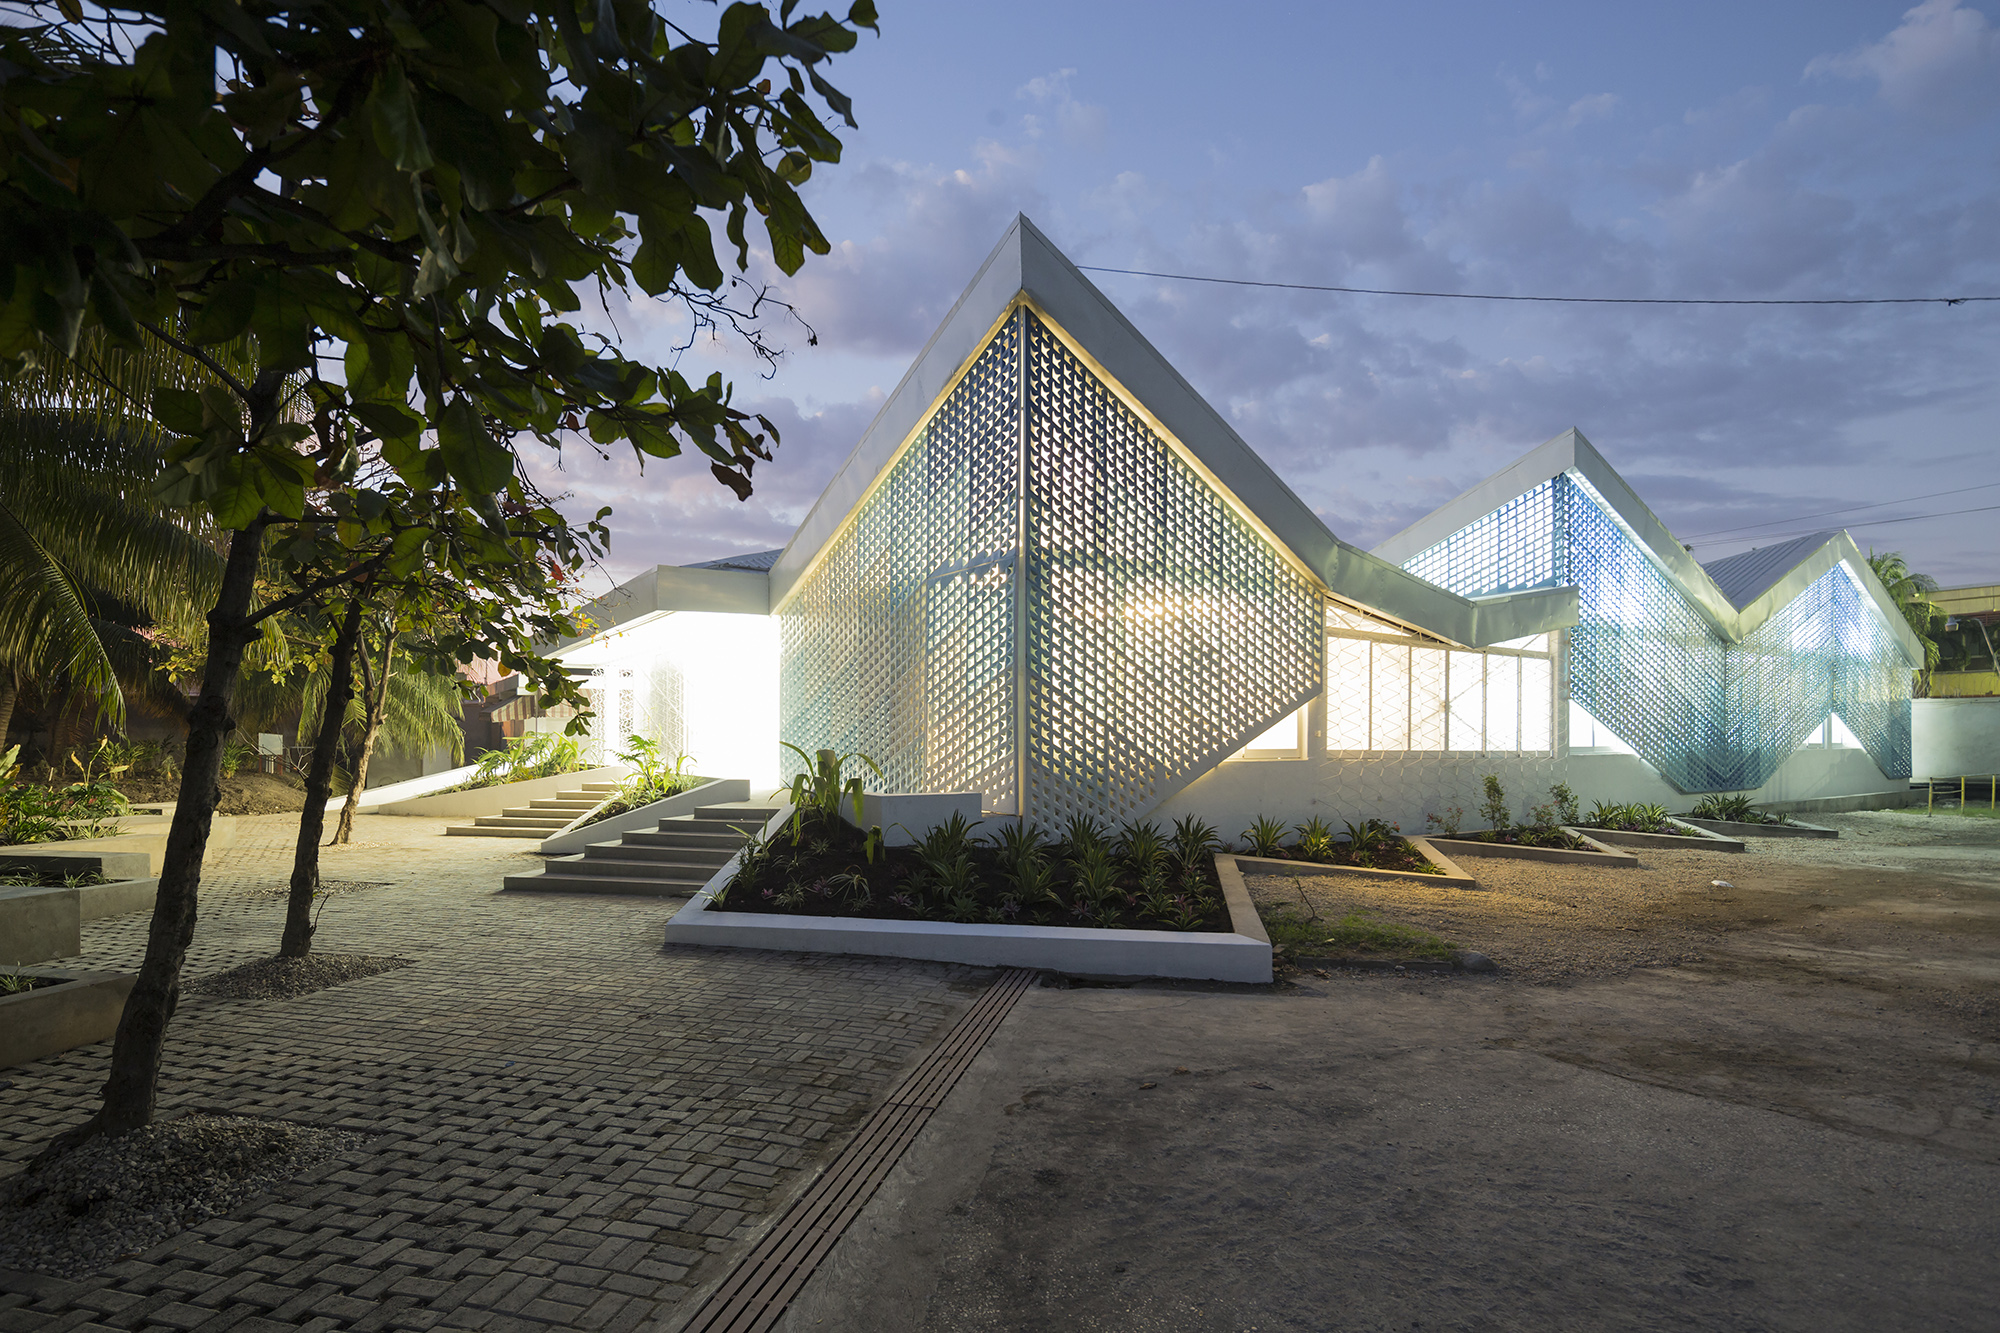 A glowing angled building with zigzagging roofline at dusk; light bleeds through perforated panels on the facade